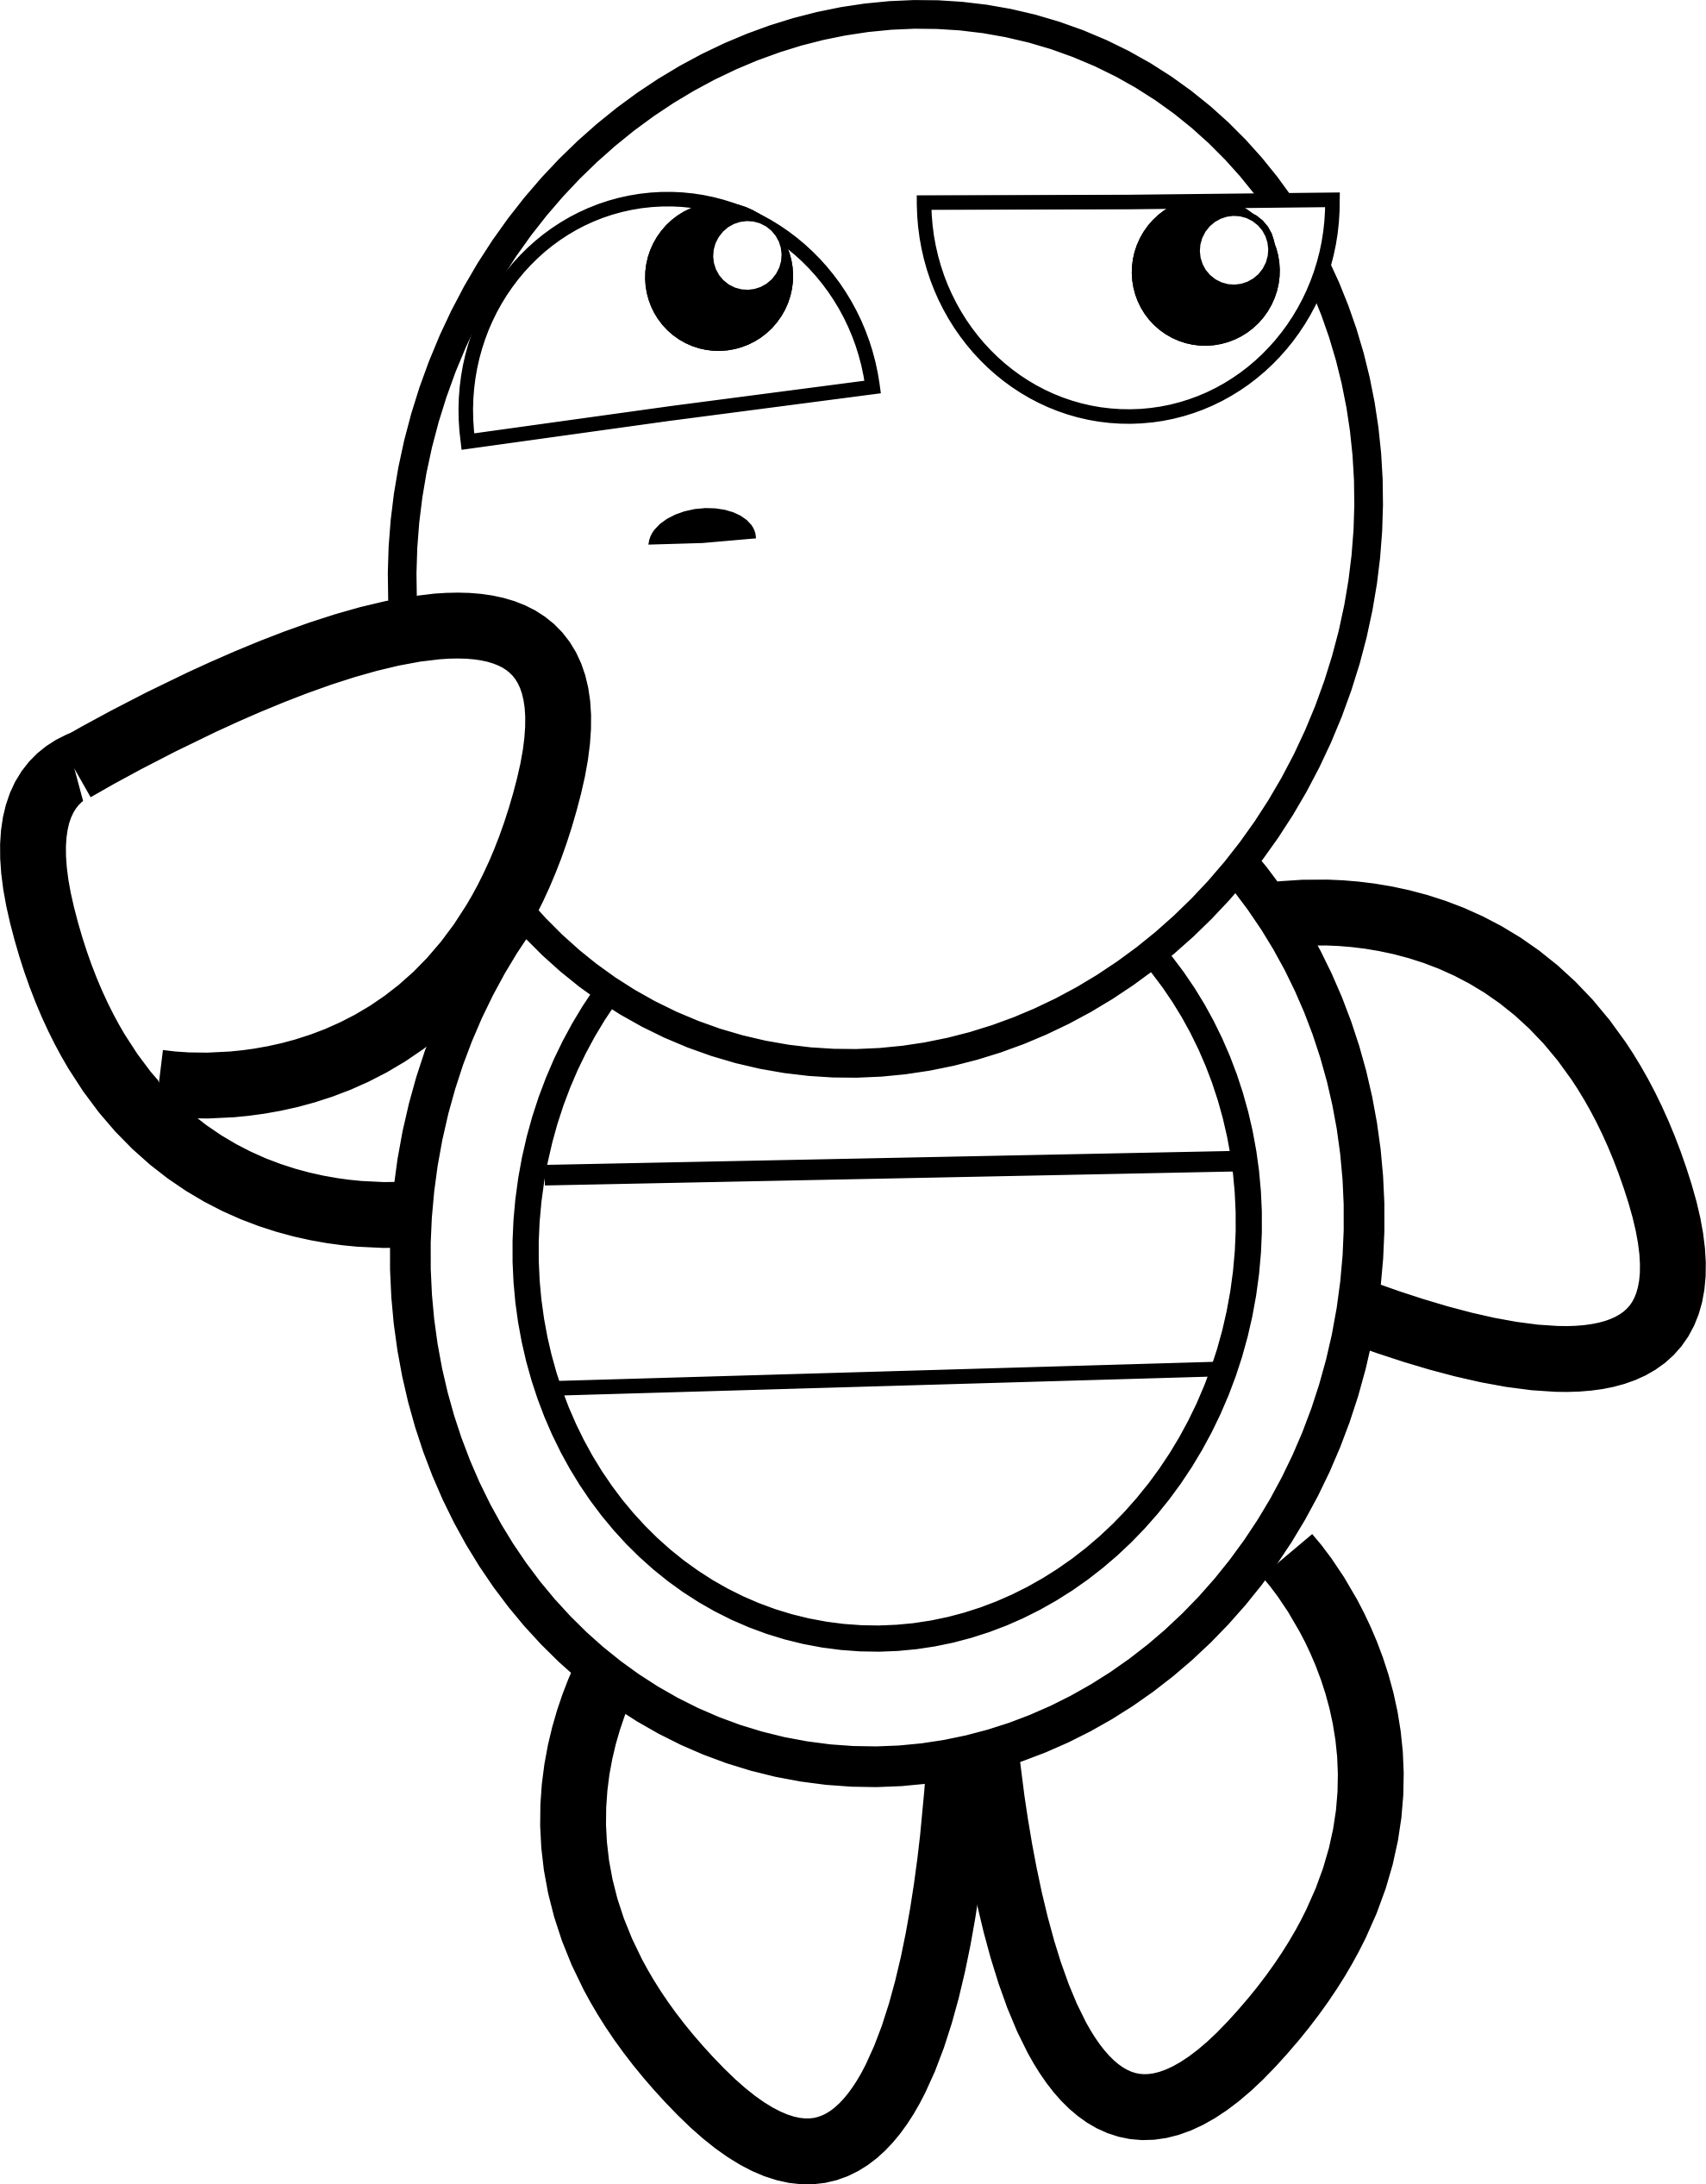 Black and white turtle clipart